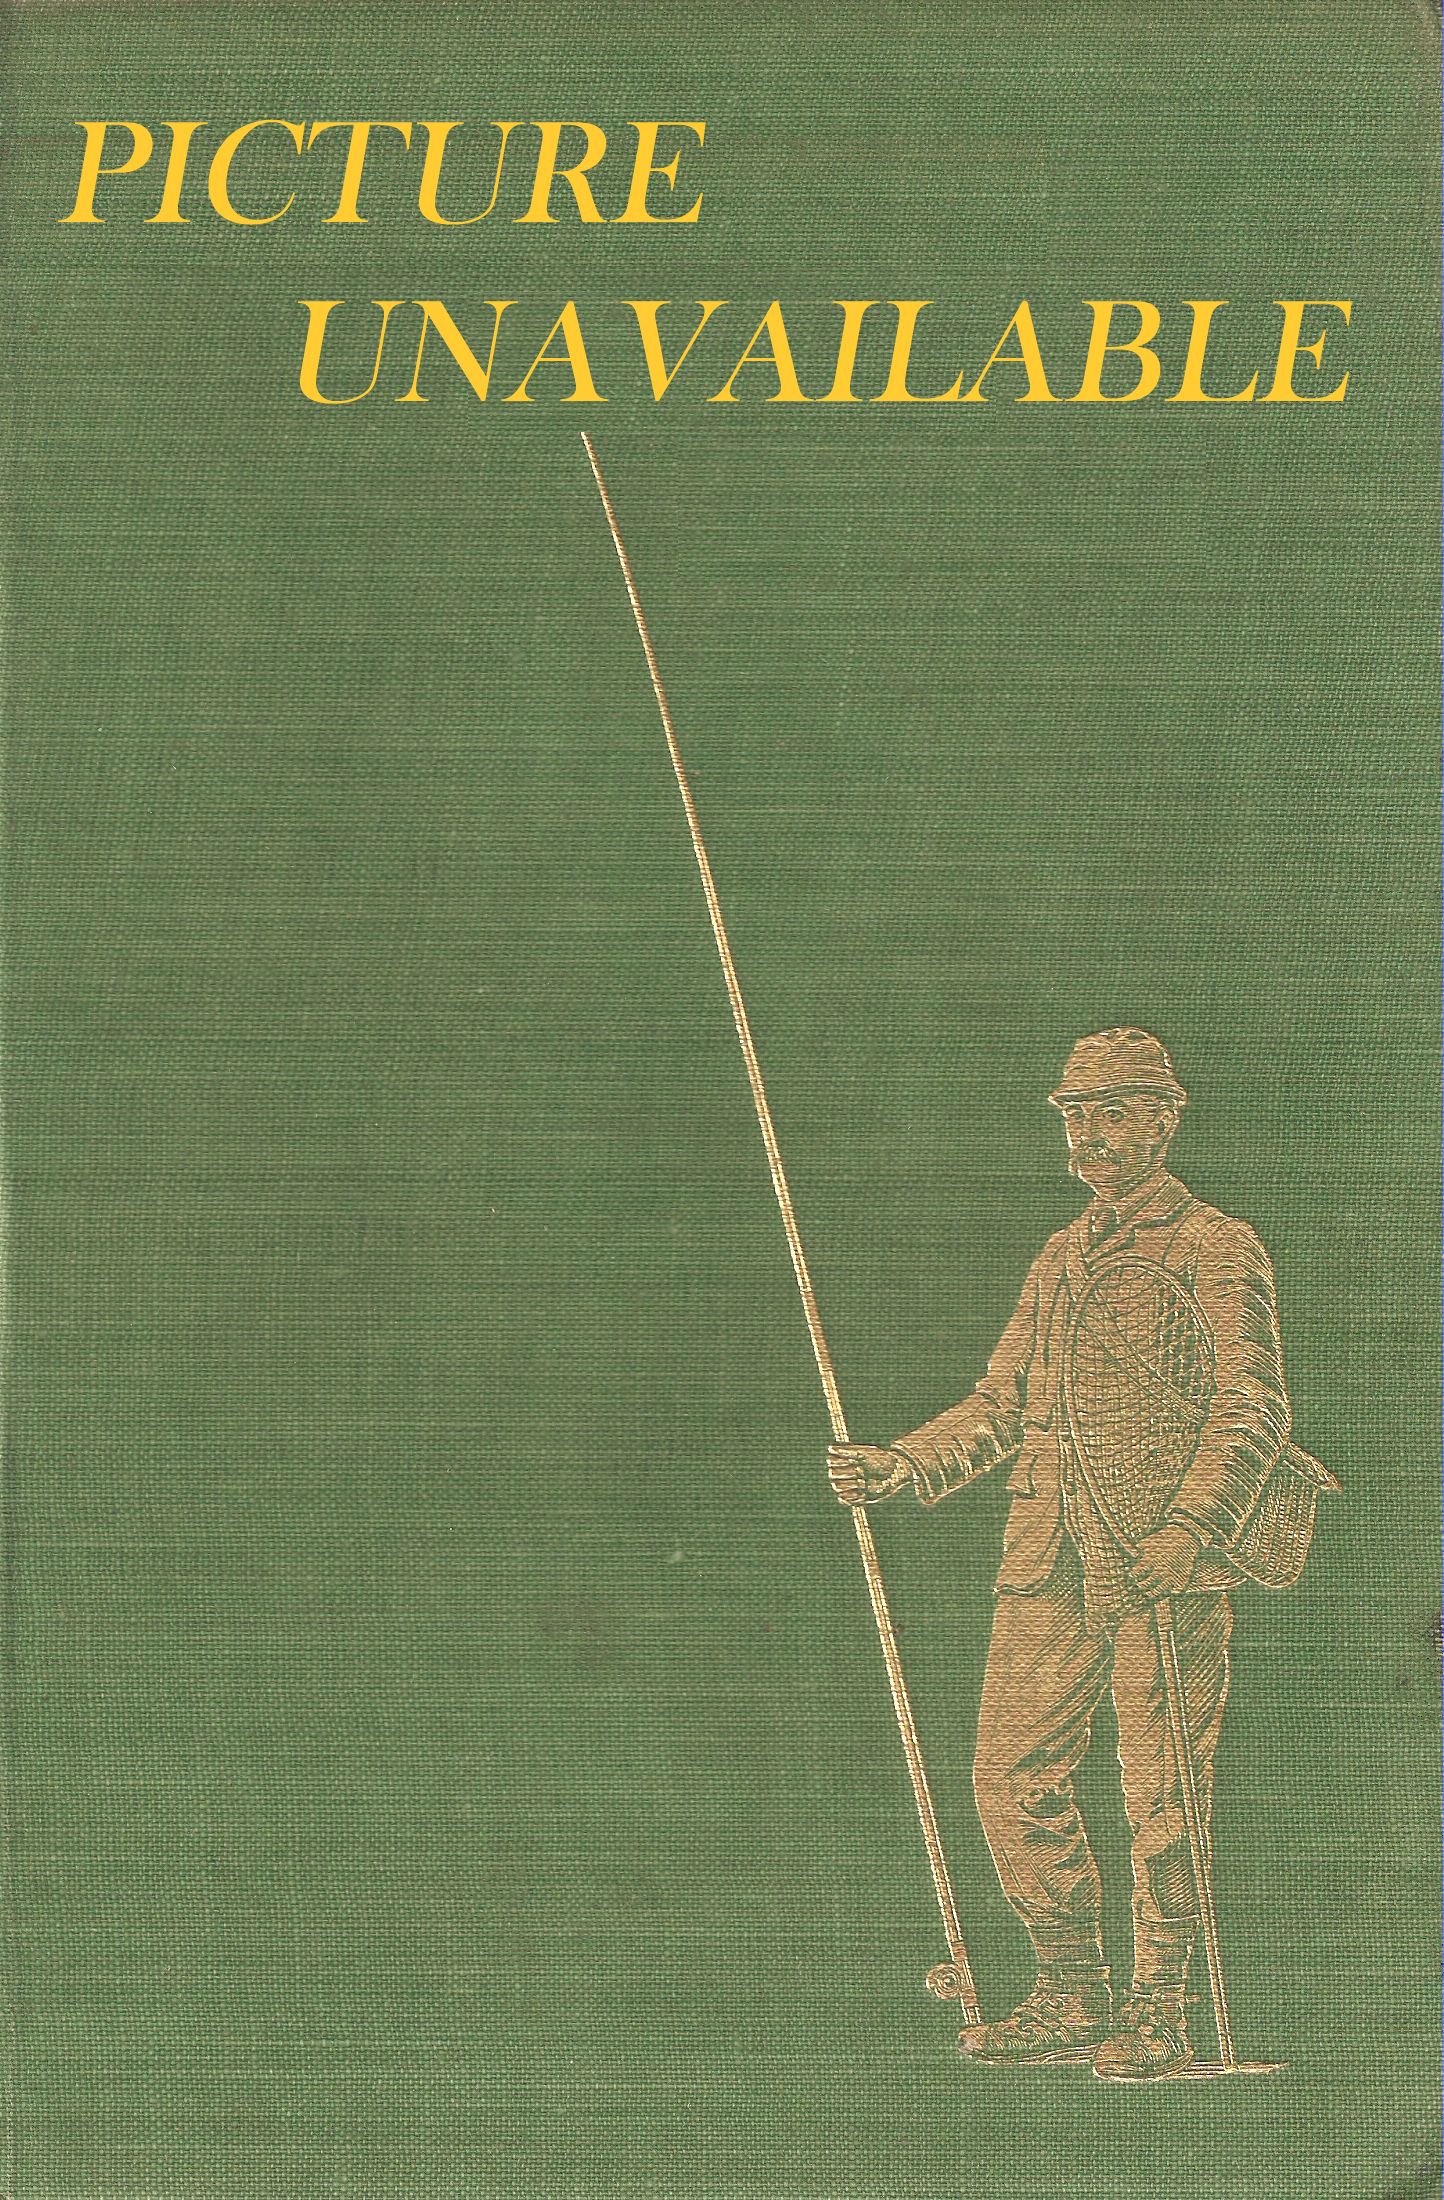 FLOAT FISHING AND SPINNING IN THE NOTTINGHAM STYLE: Being a treatise on  the so-called coarse fishes, with instructions for their capture.  Including chapters on pike fishing, and worm fishing for salmon. By J.W.  Martin, the 